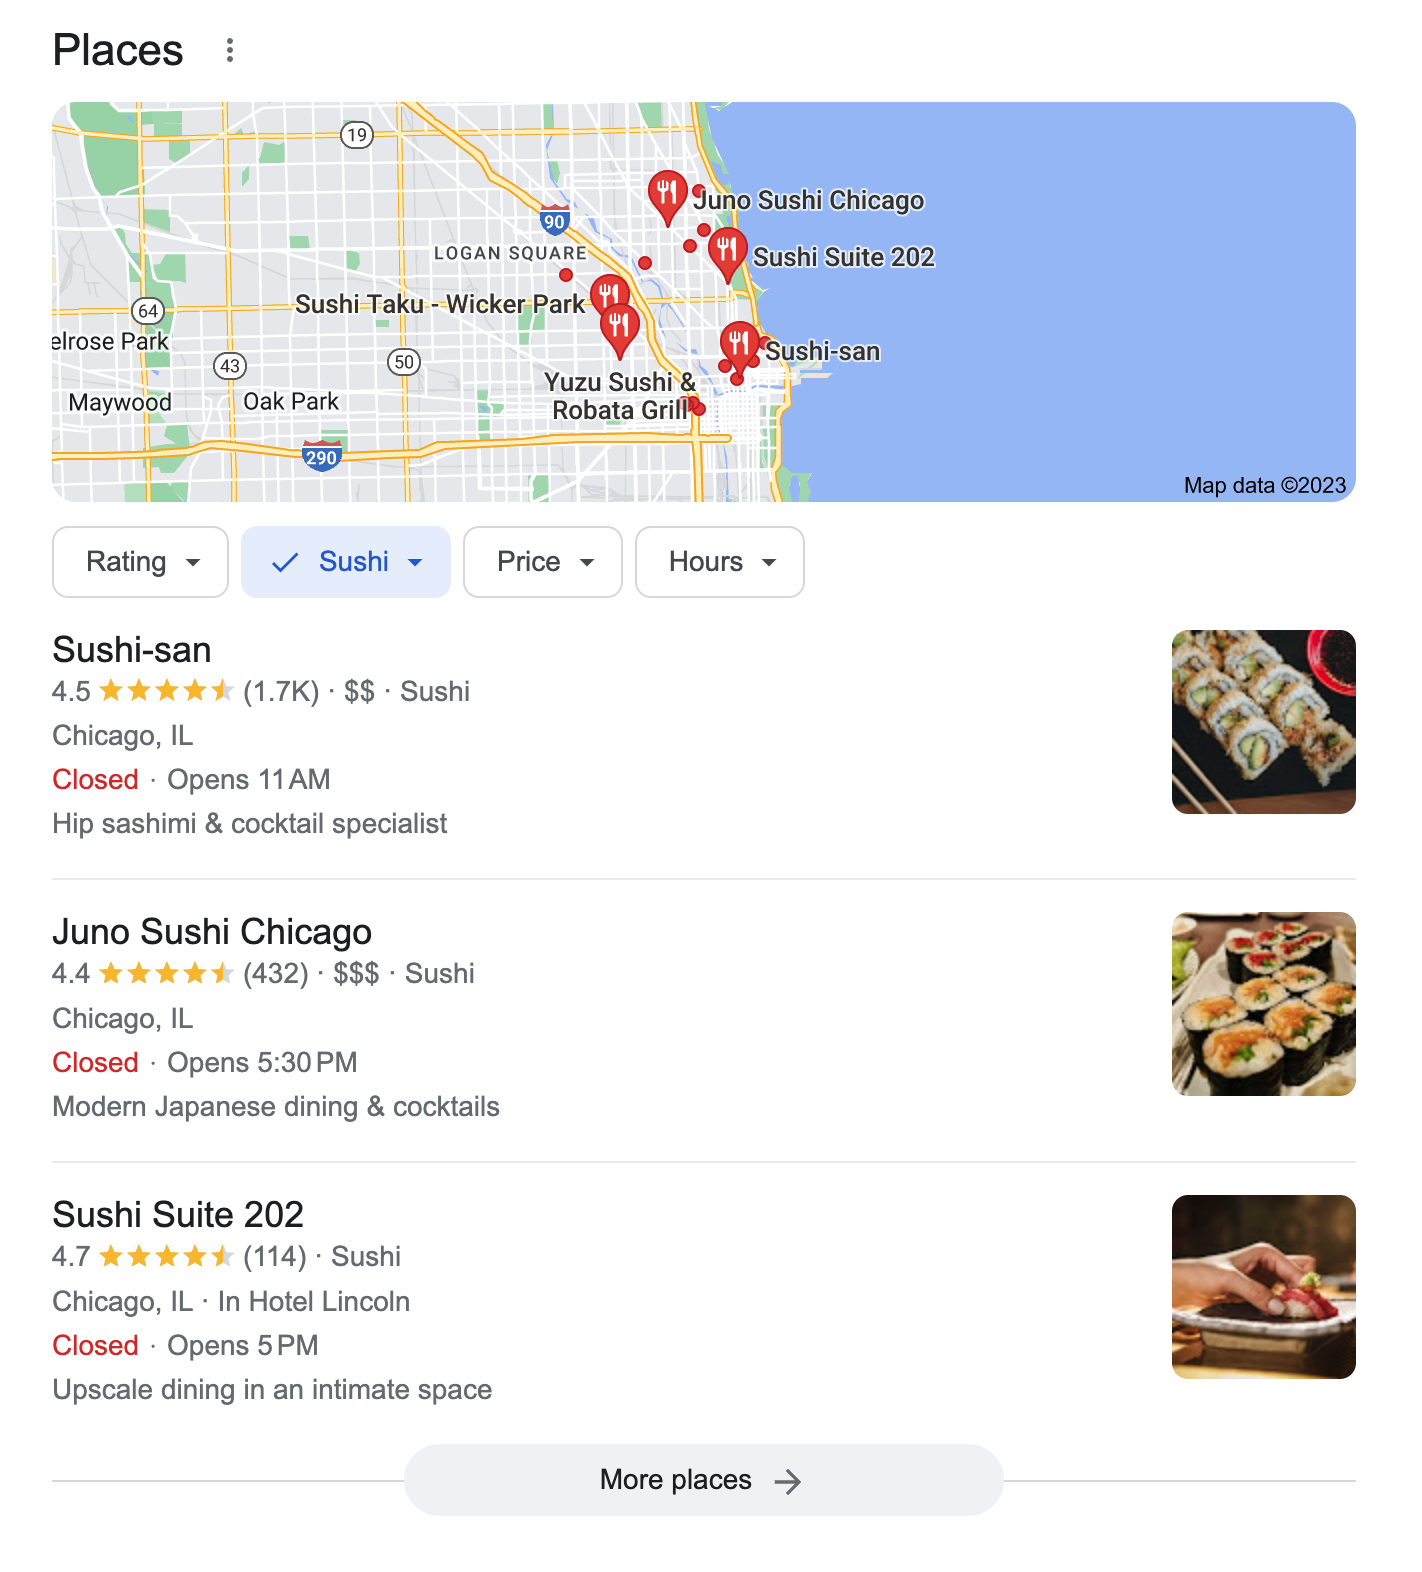 sushi in chicago results in Places